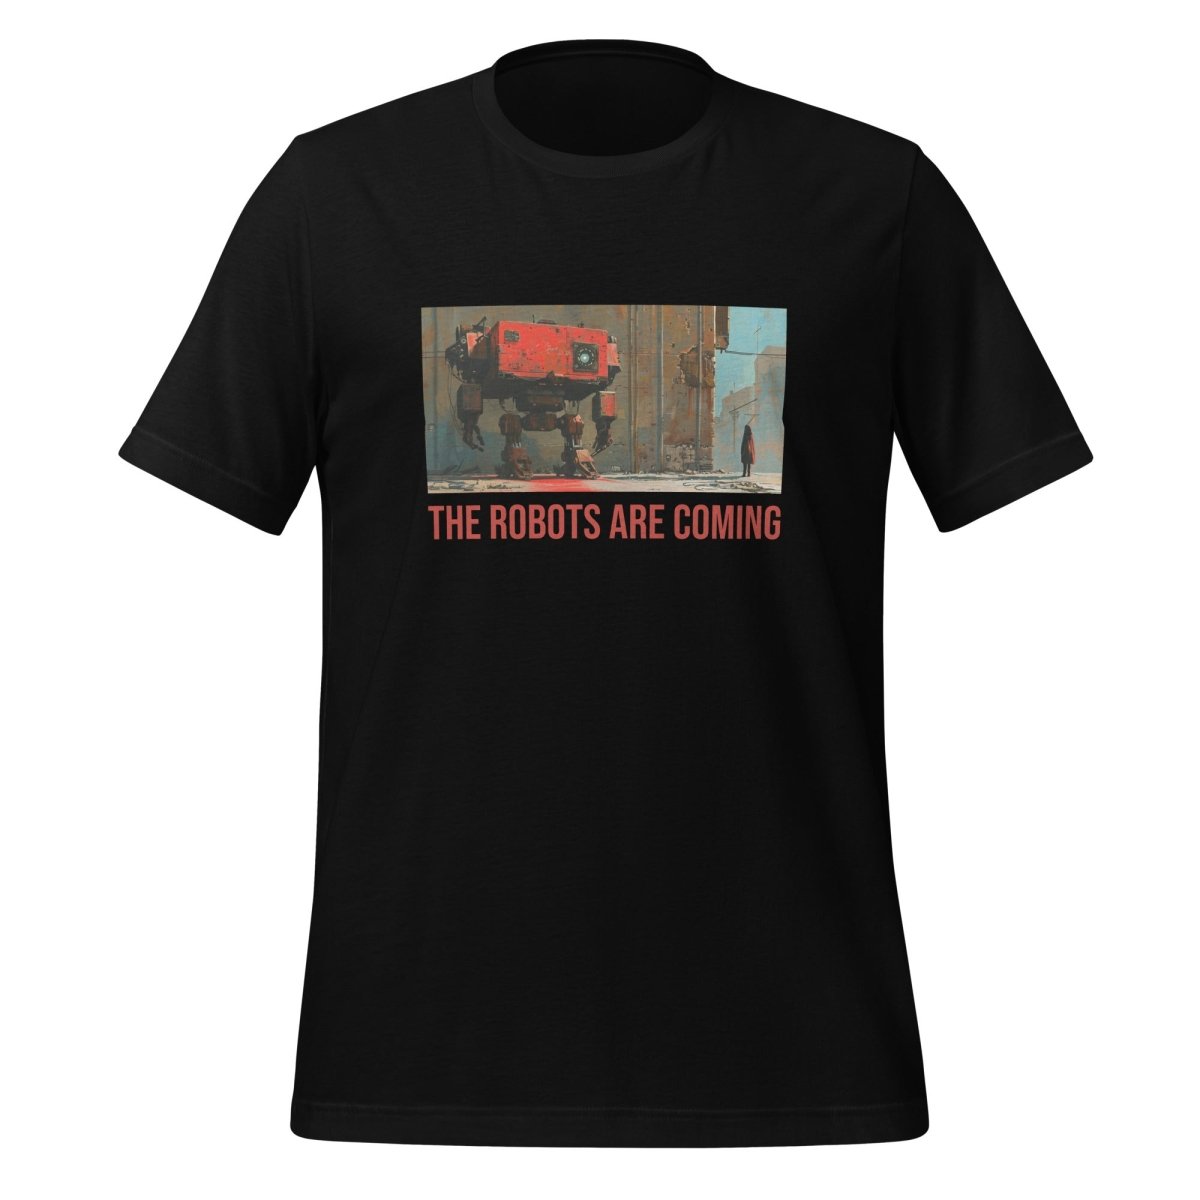 Illustrated The Robots Are Coming T - Shirt (unisex) - Black - AI Store